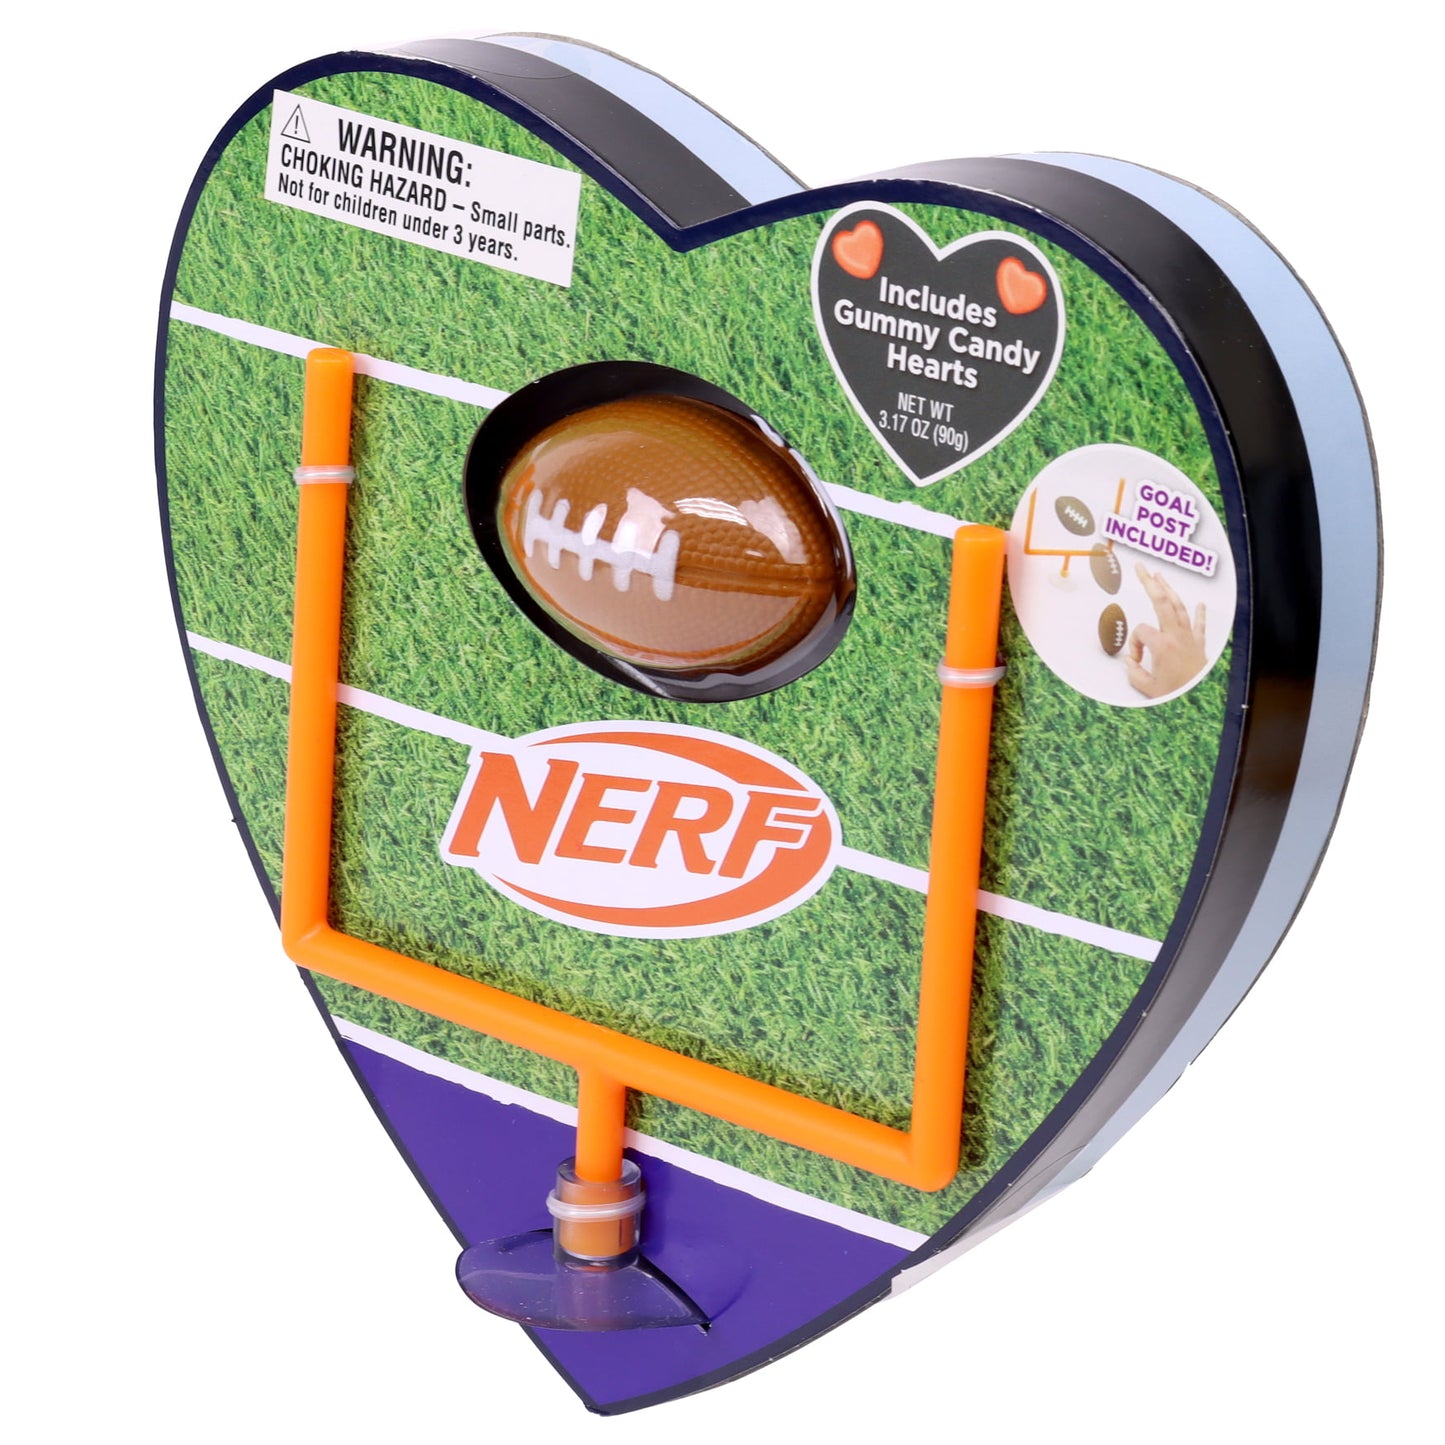 Frankford Nerf Heart Football Game & Candy 3.17oz - 6ct